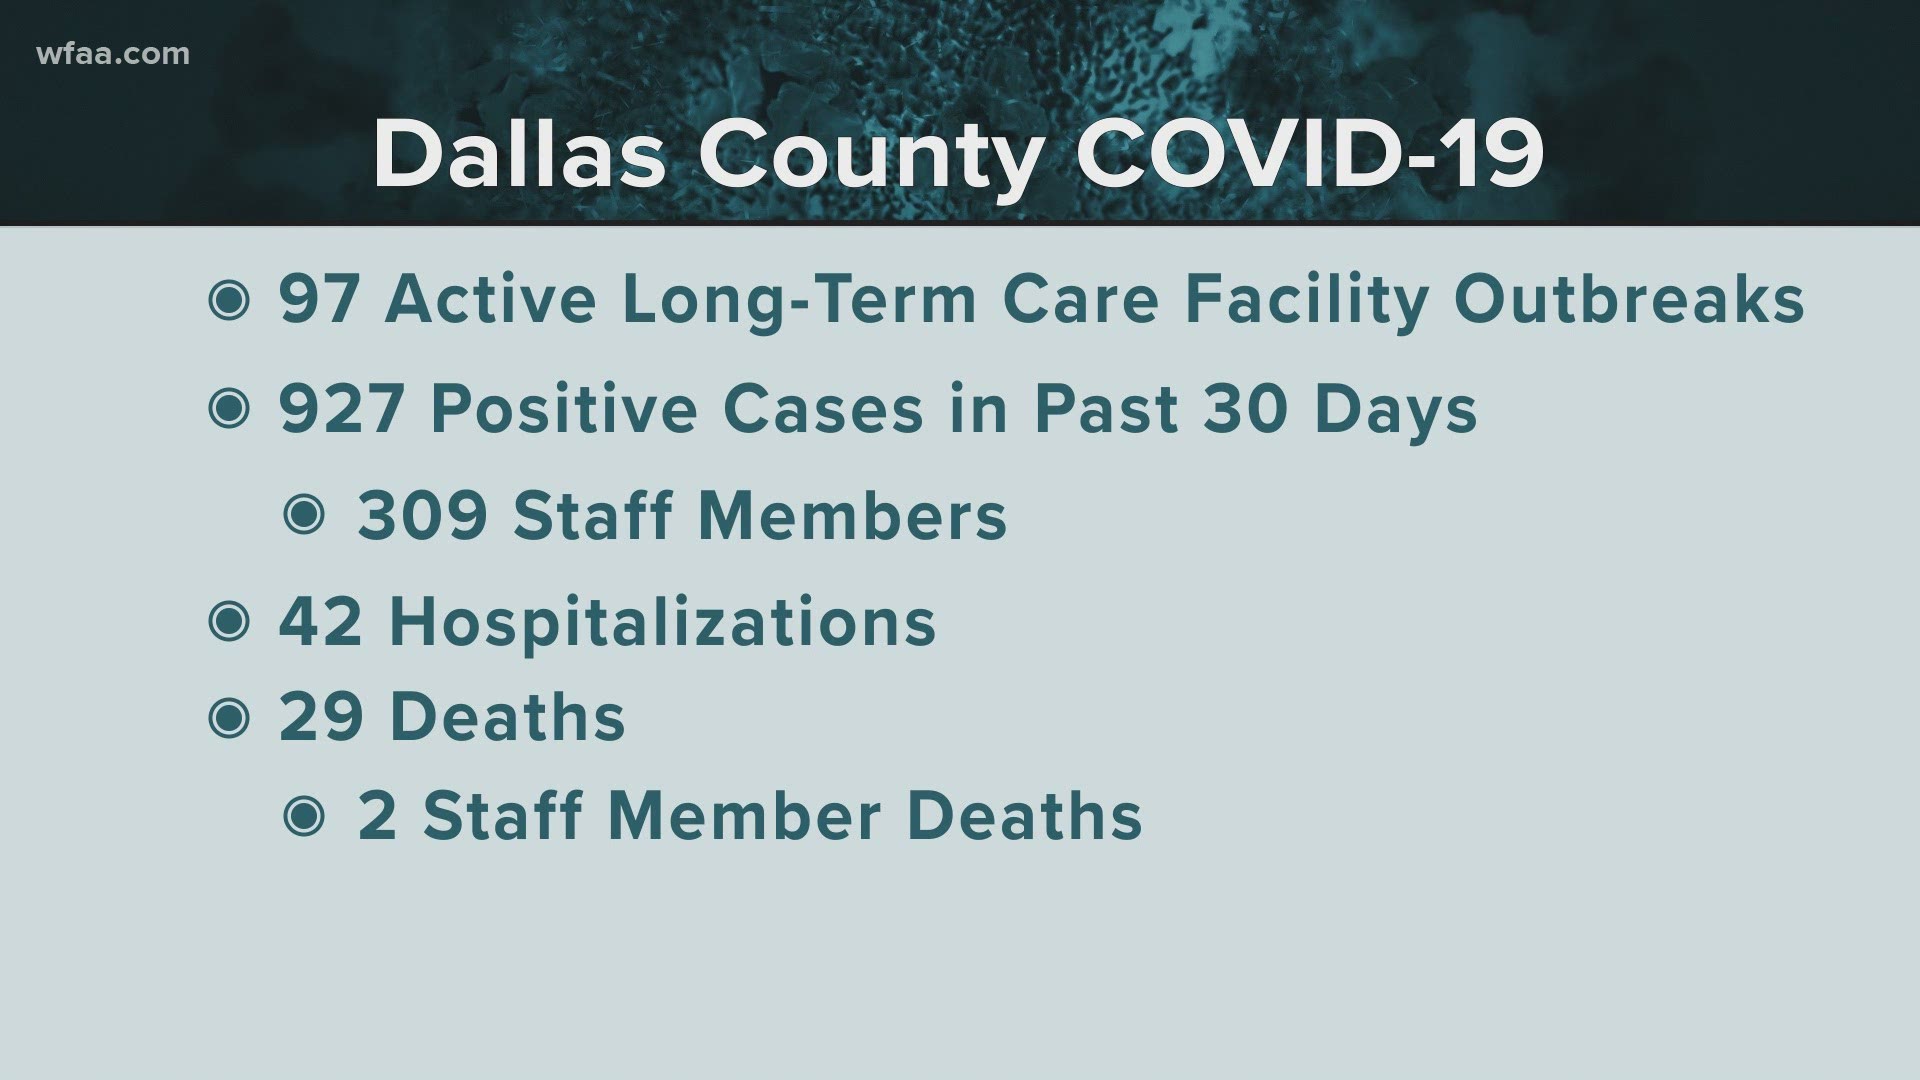 Over the past 30 days, there have been 927 COVID-19 cases reported from these facilities, including 29 deaths.